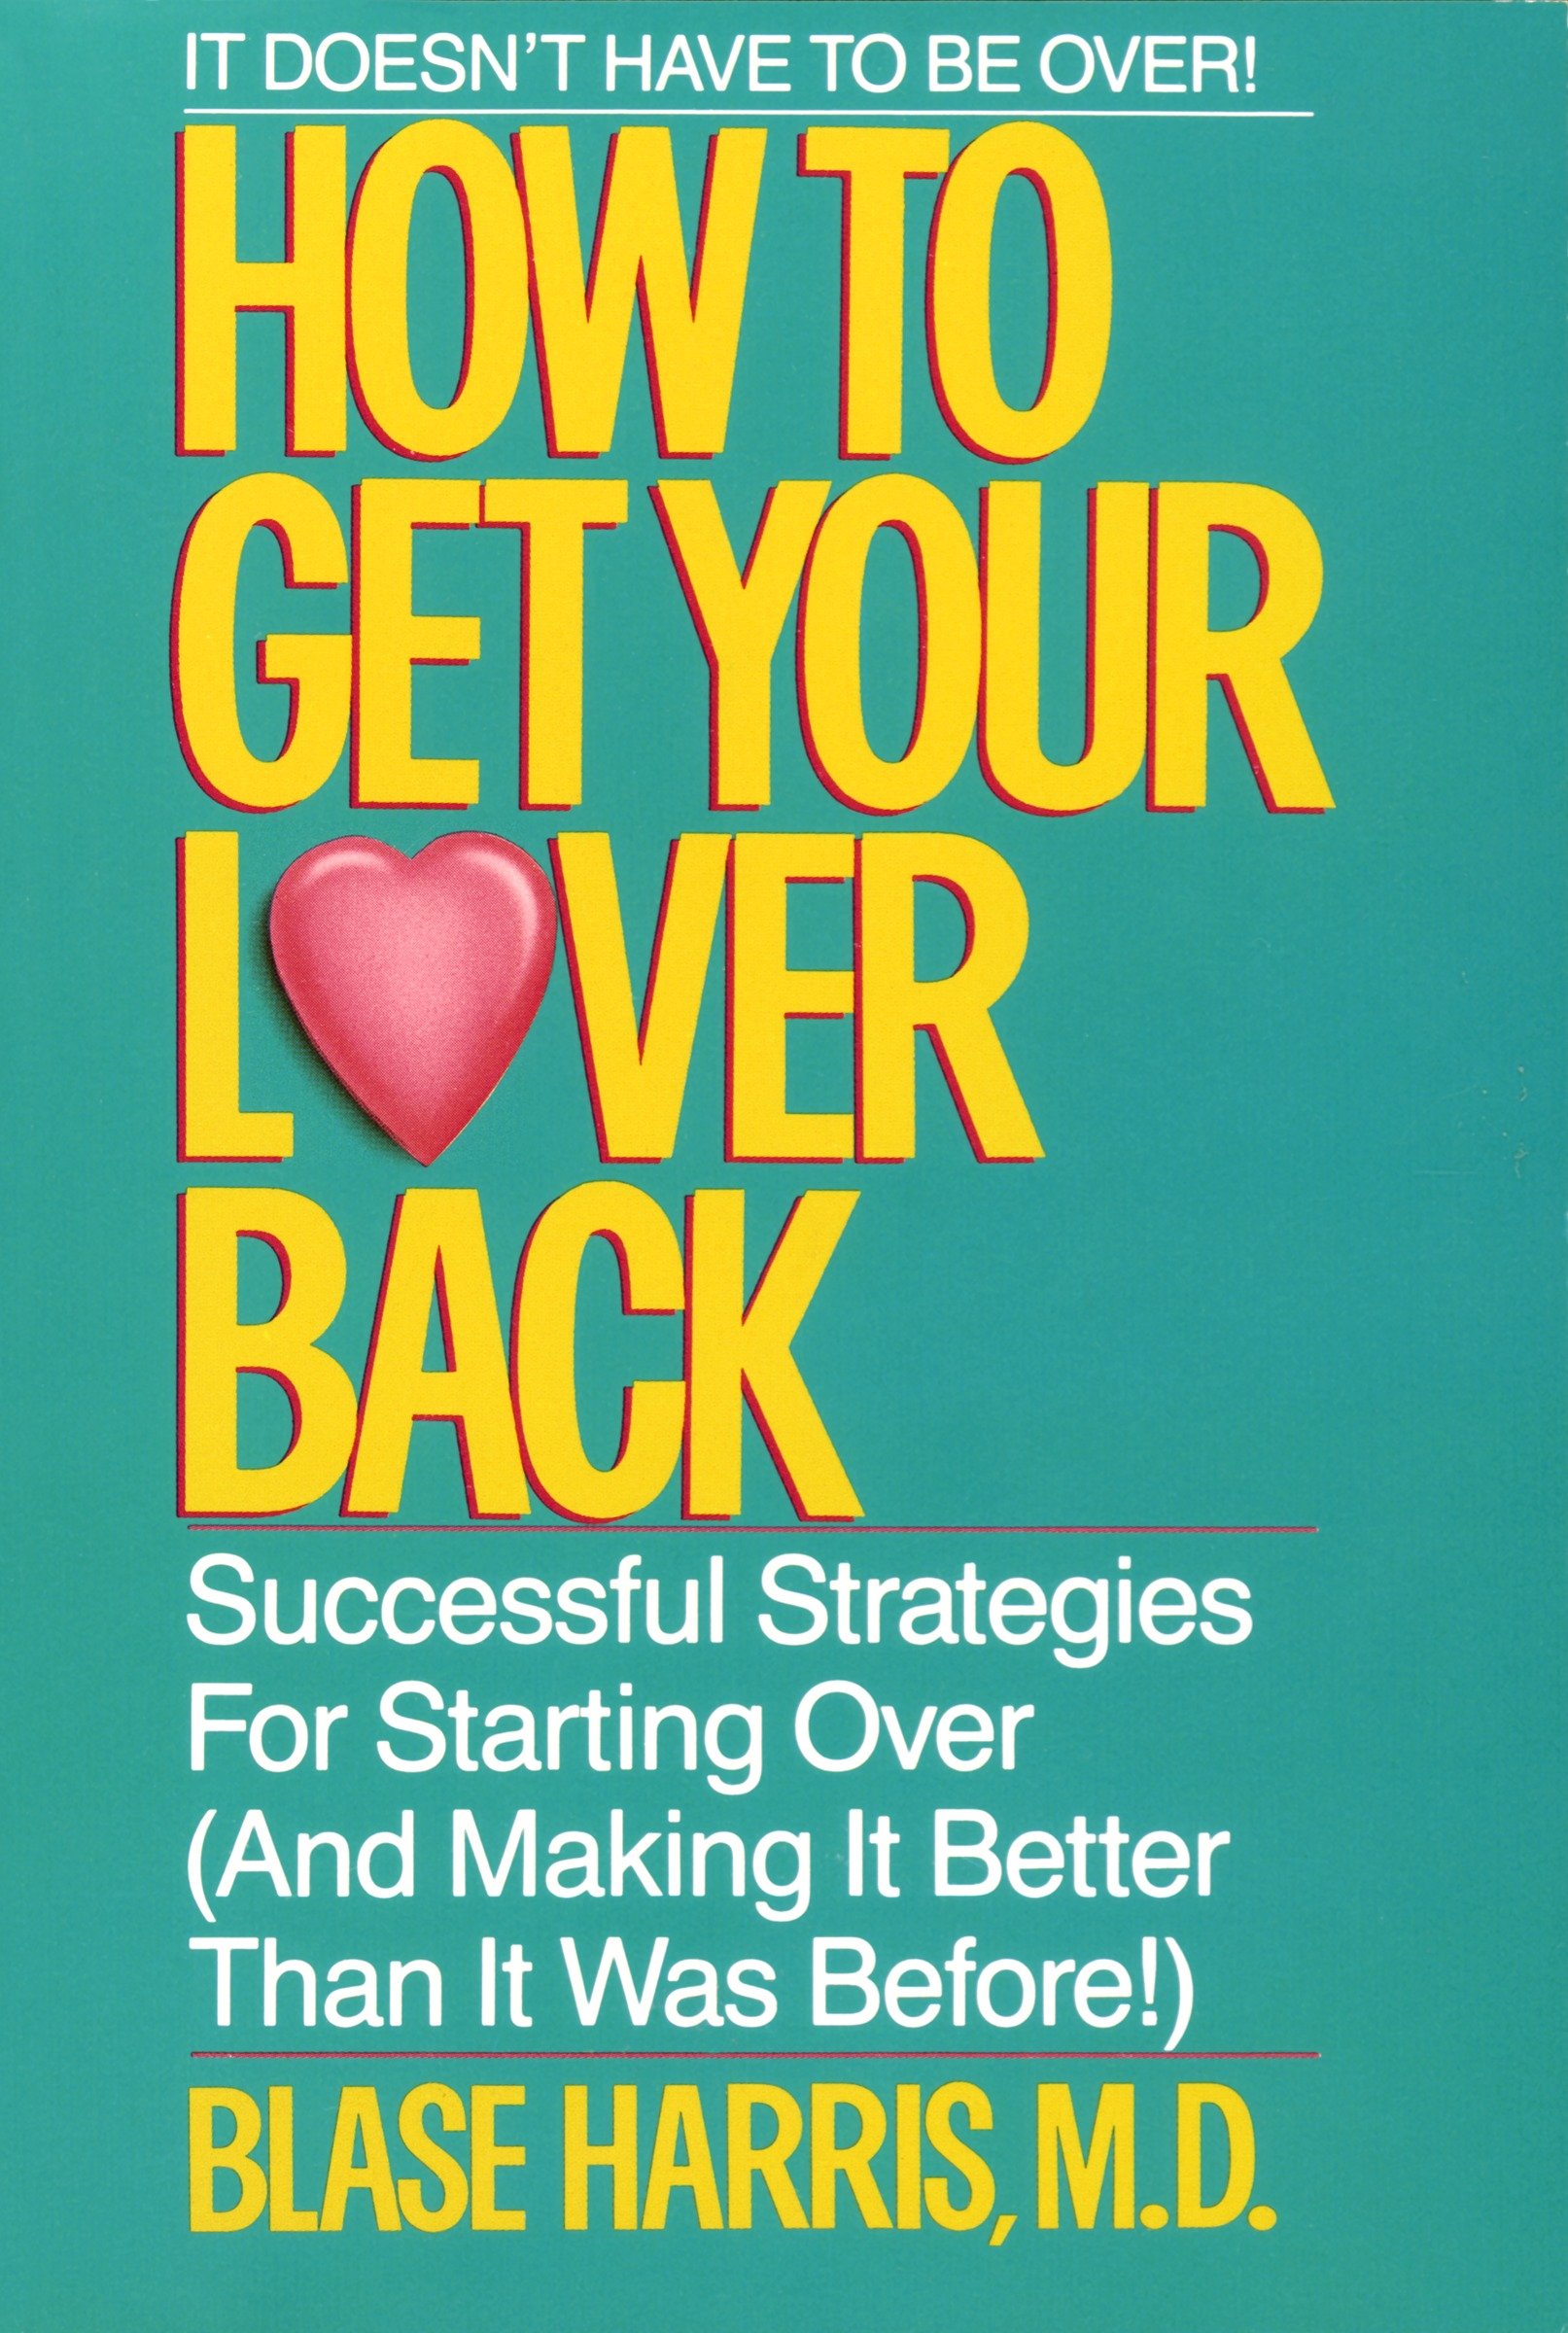 How to get your lover back cover image